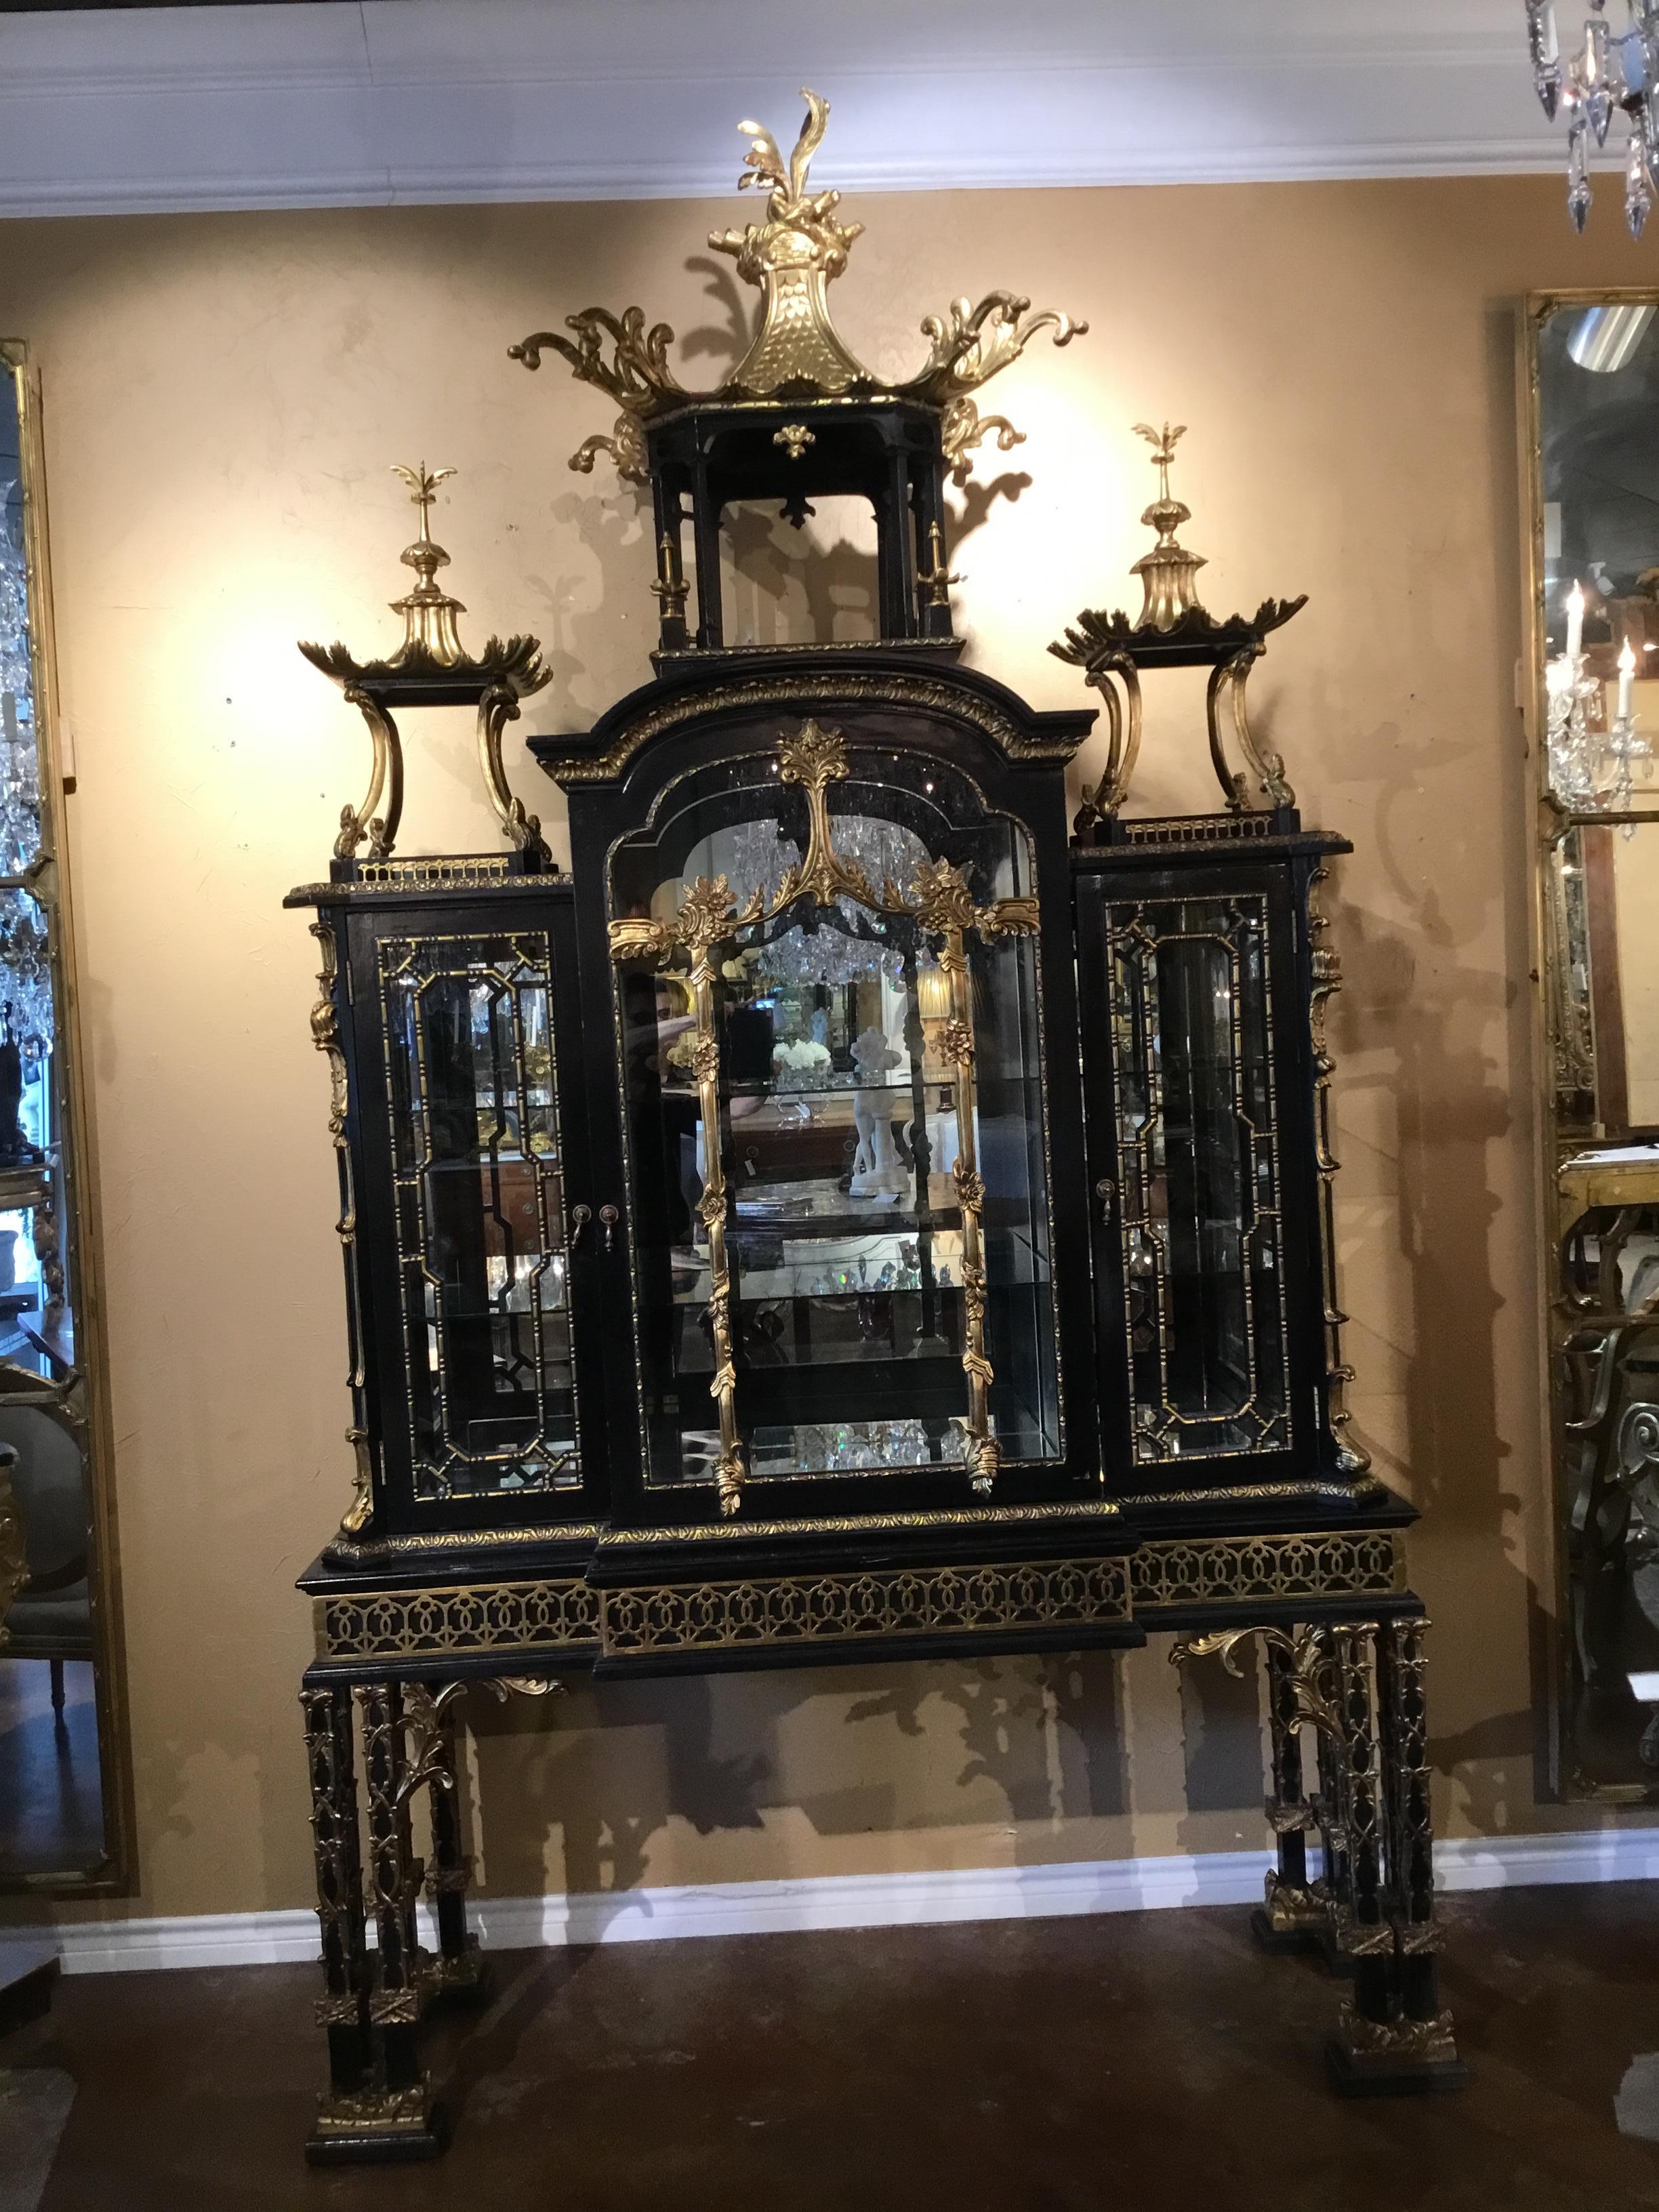 Monumental replica of Thomas Chippendale’s Kenure cabinet in the Chinese Chippendale taste,
With a large open pagoda-form structural crest flanked to either side by smaller like structures,
The central section fitted with a single arched door